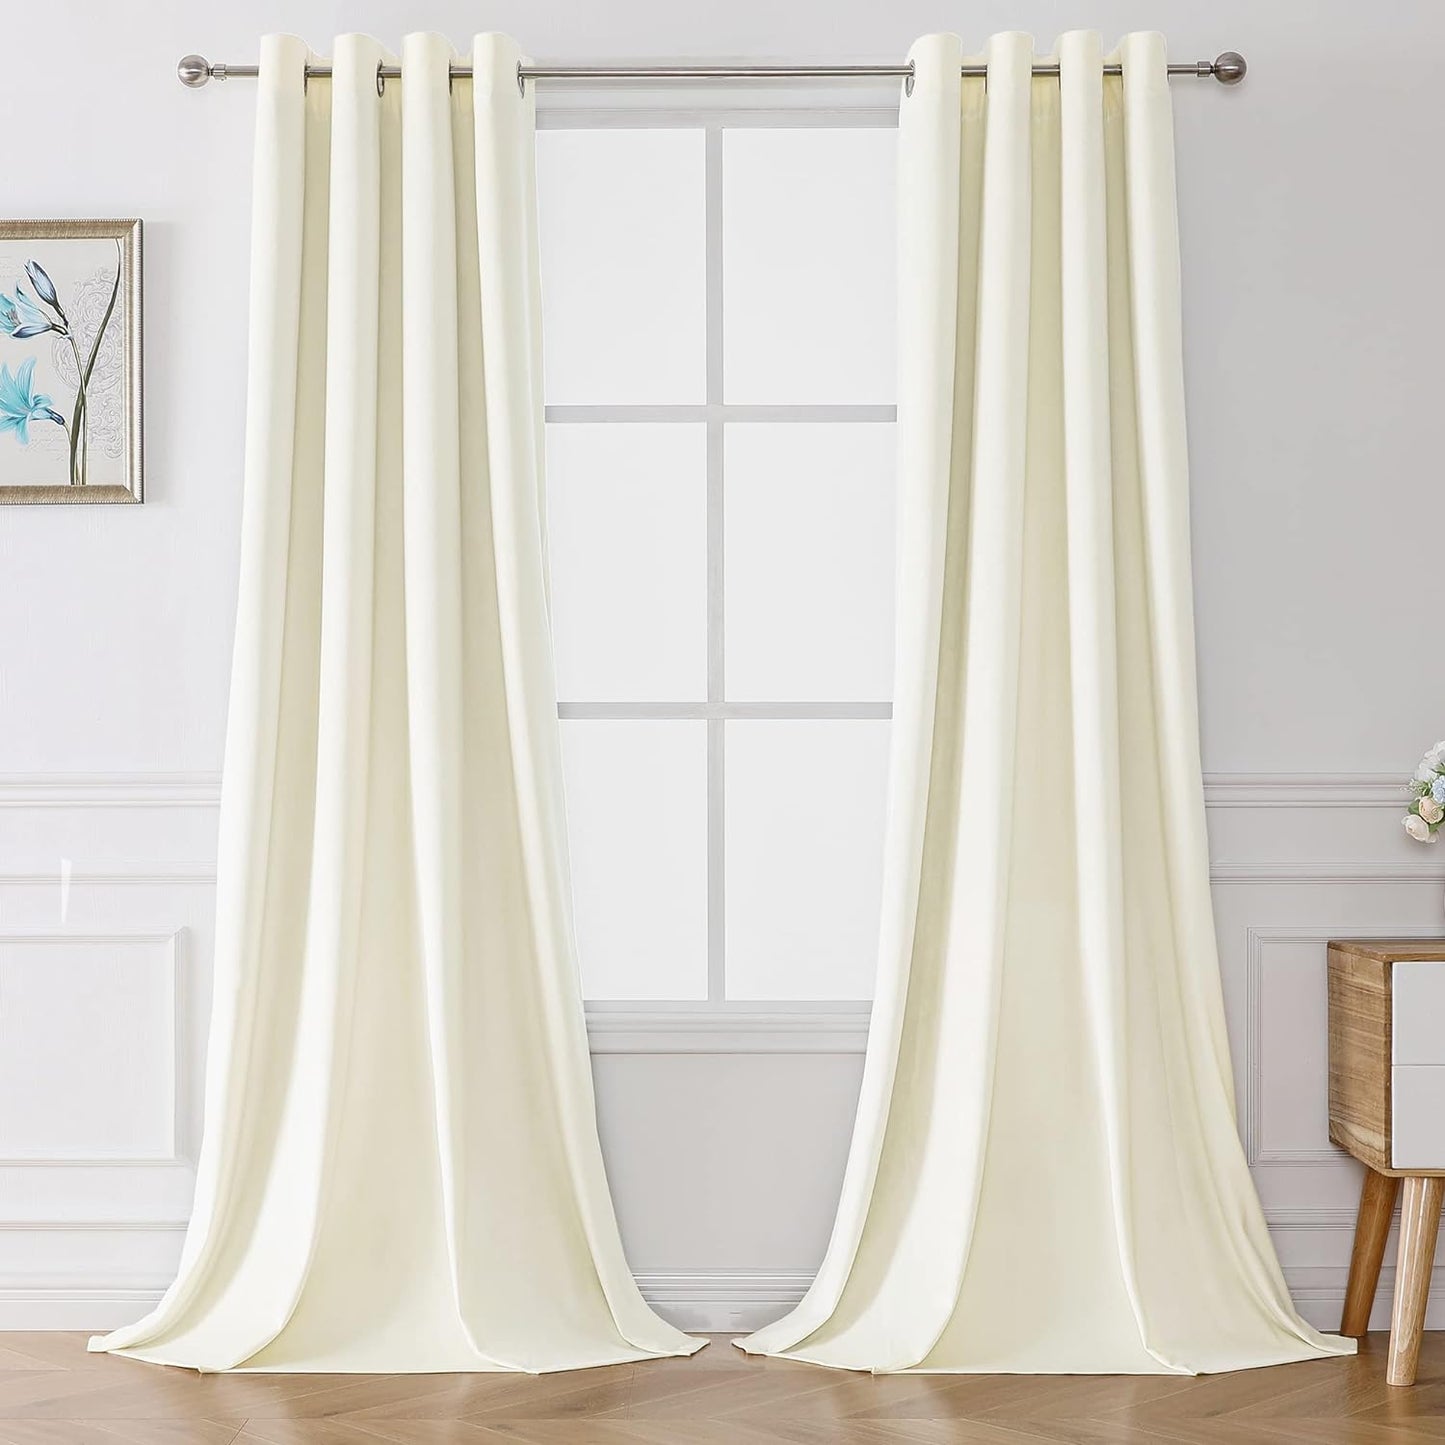 Victree Velvet Curtains for Bedroom, Blackout Curtains 52 X 84 Inch Length - Room Darkening Sun Light Blocking Grommet Window Drapes for Living Room, 2 Panels, Navy  Victree Cream 52 X 108 Inches 